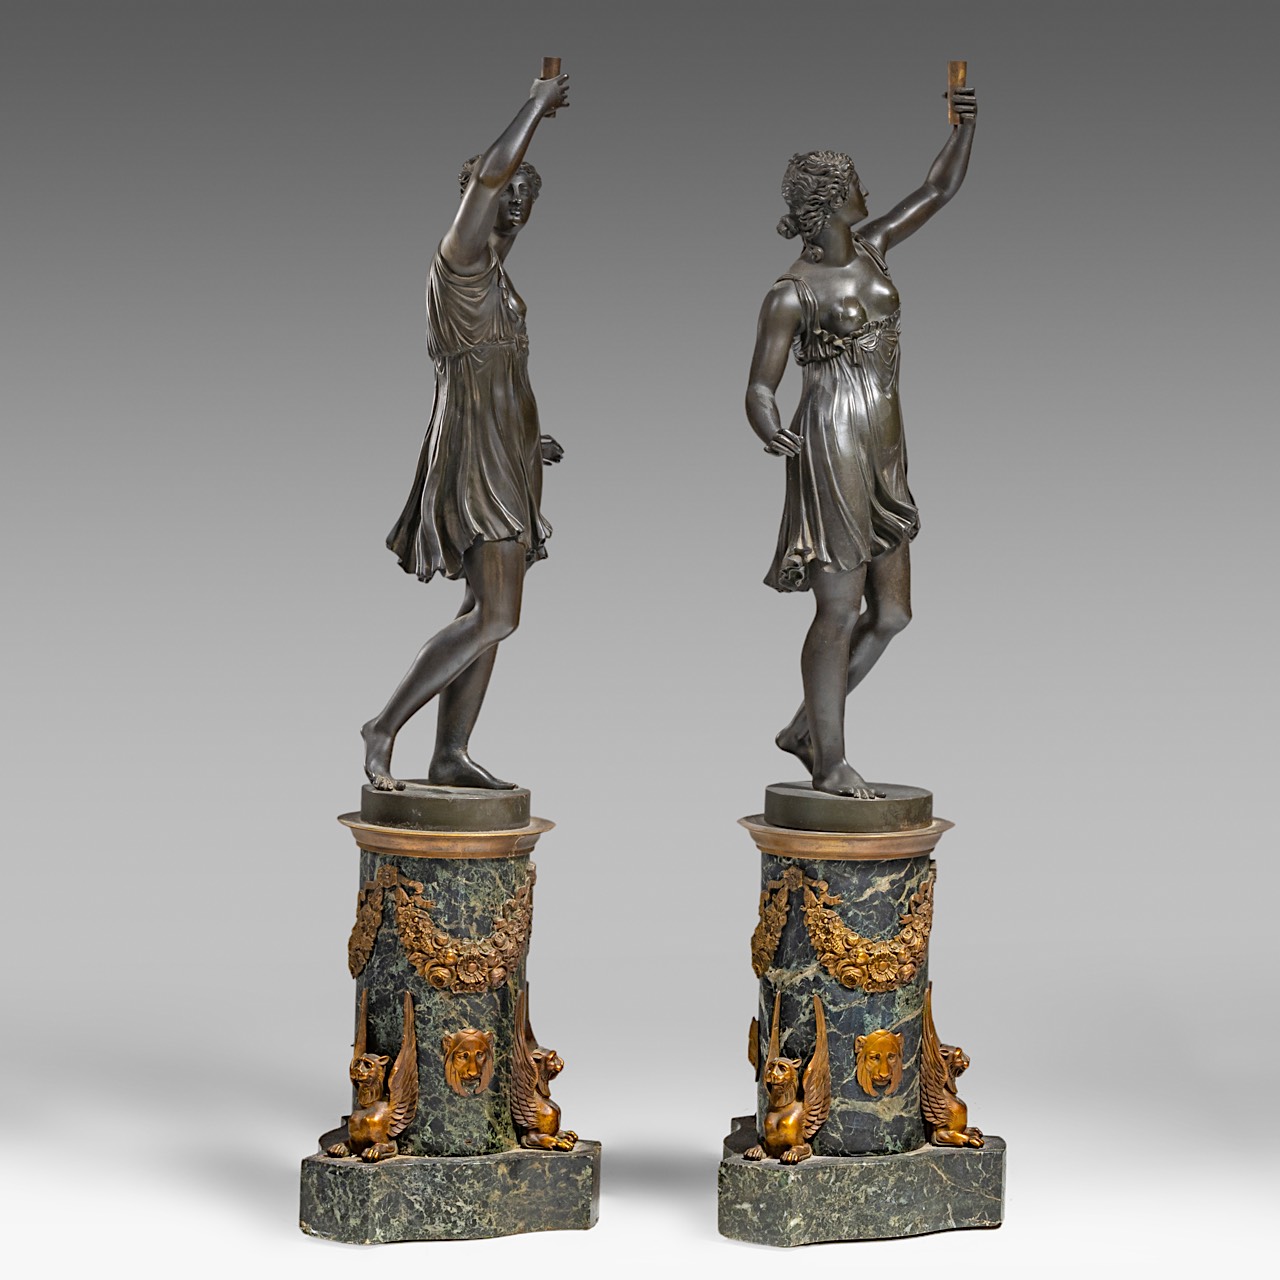 A pair of Empire style patinated bronze and vert de mer marble figural sculptures, H 86 cm - Image 5 of 6